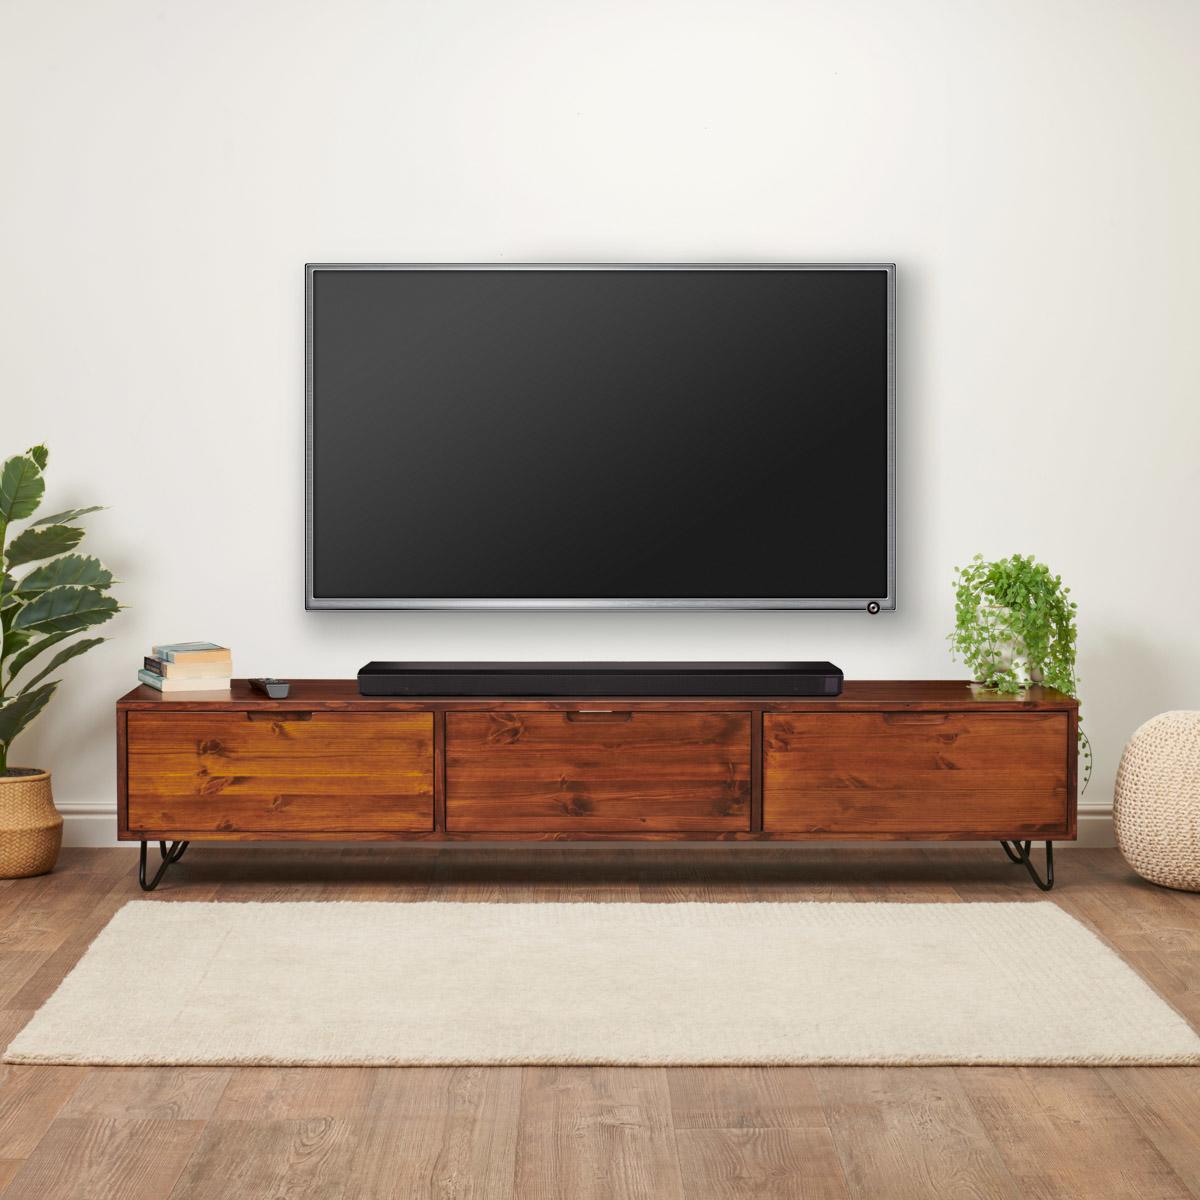 820 Low TV Cabinet - Fully Enclosed - 180cm Wide - Sustainable Solid Wood -  Minimalistic Design - With Storage - Three Hinged Flap-Down Doors 